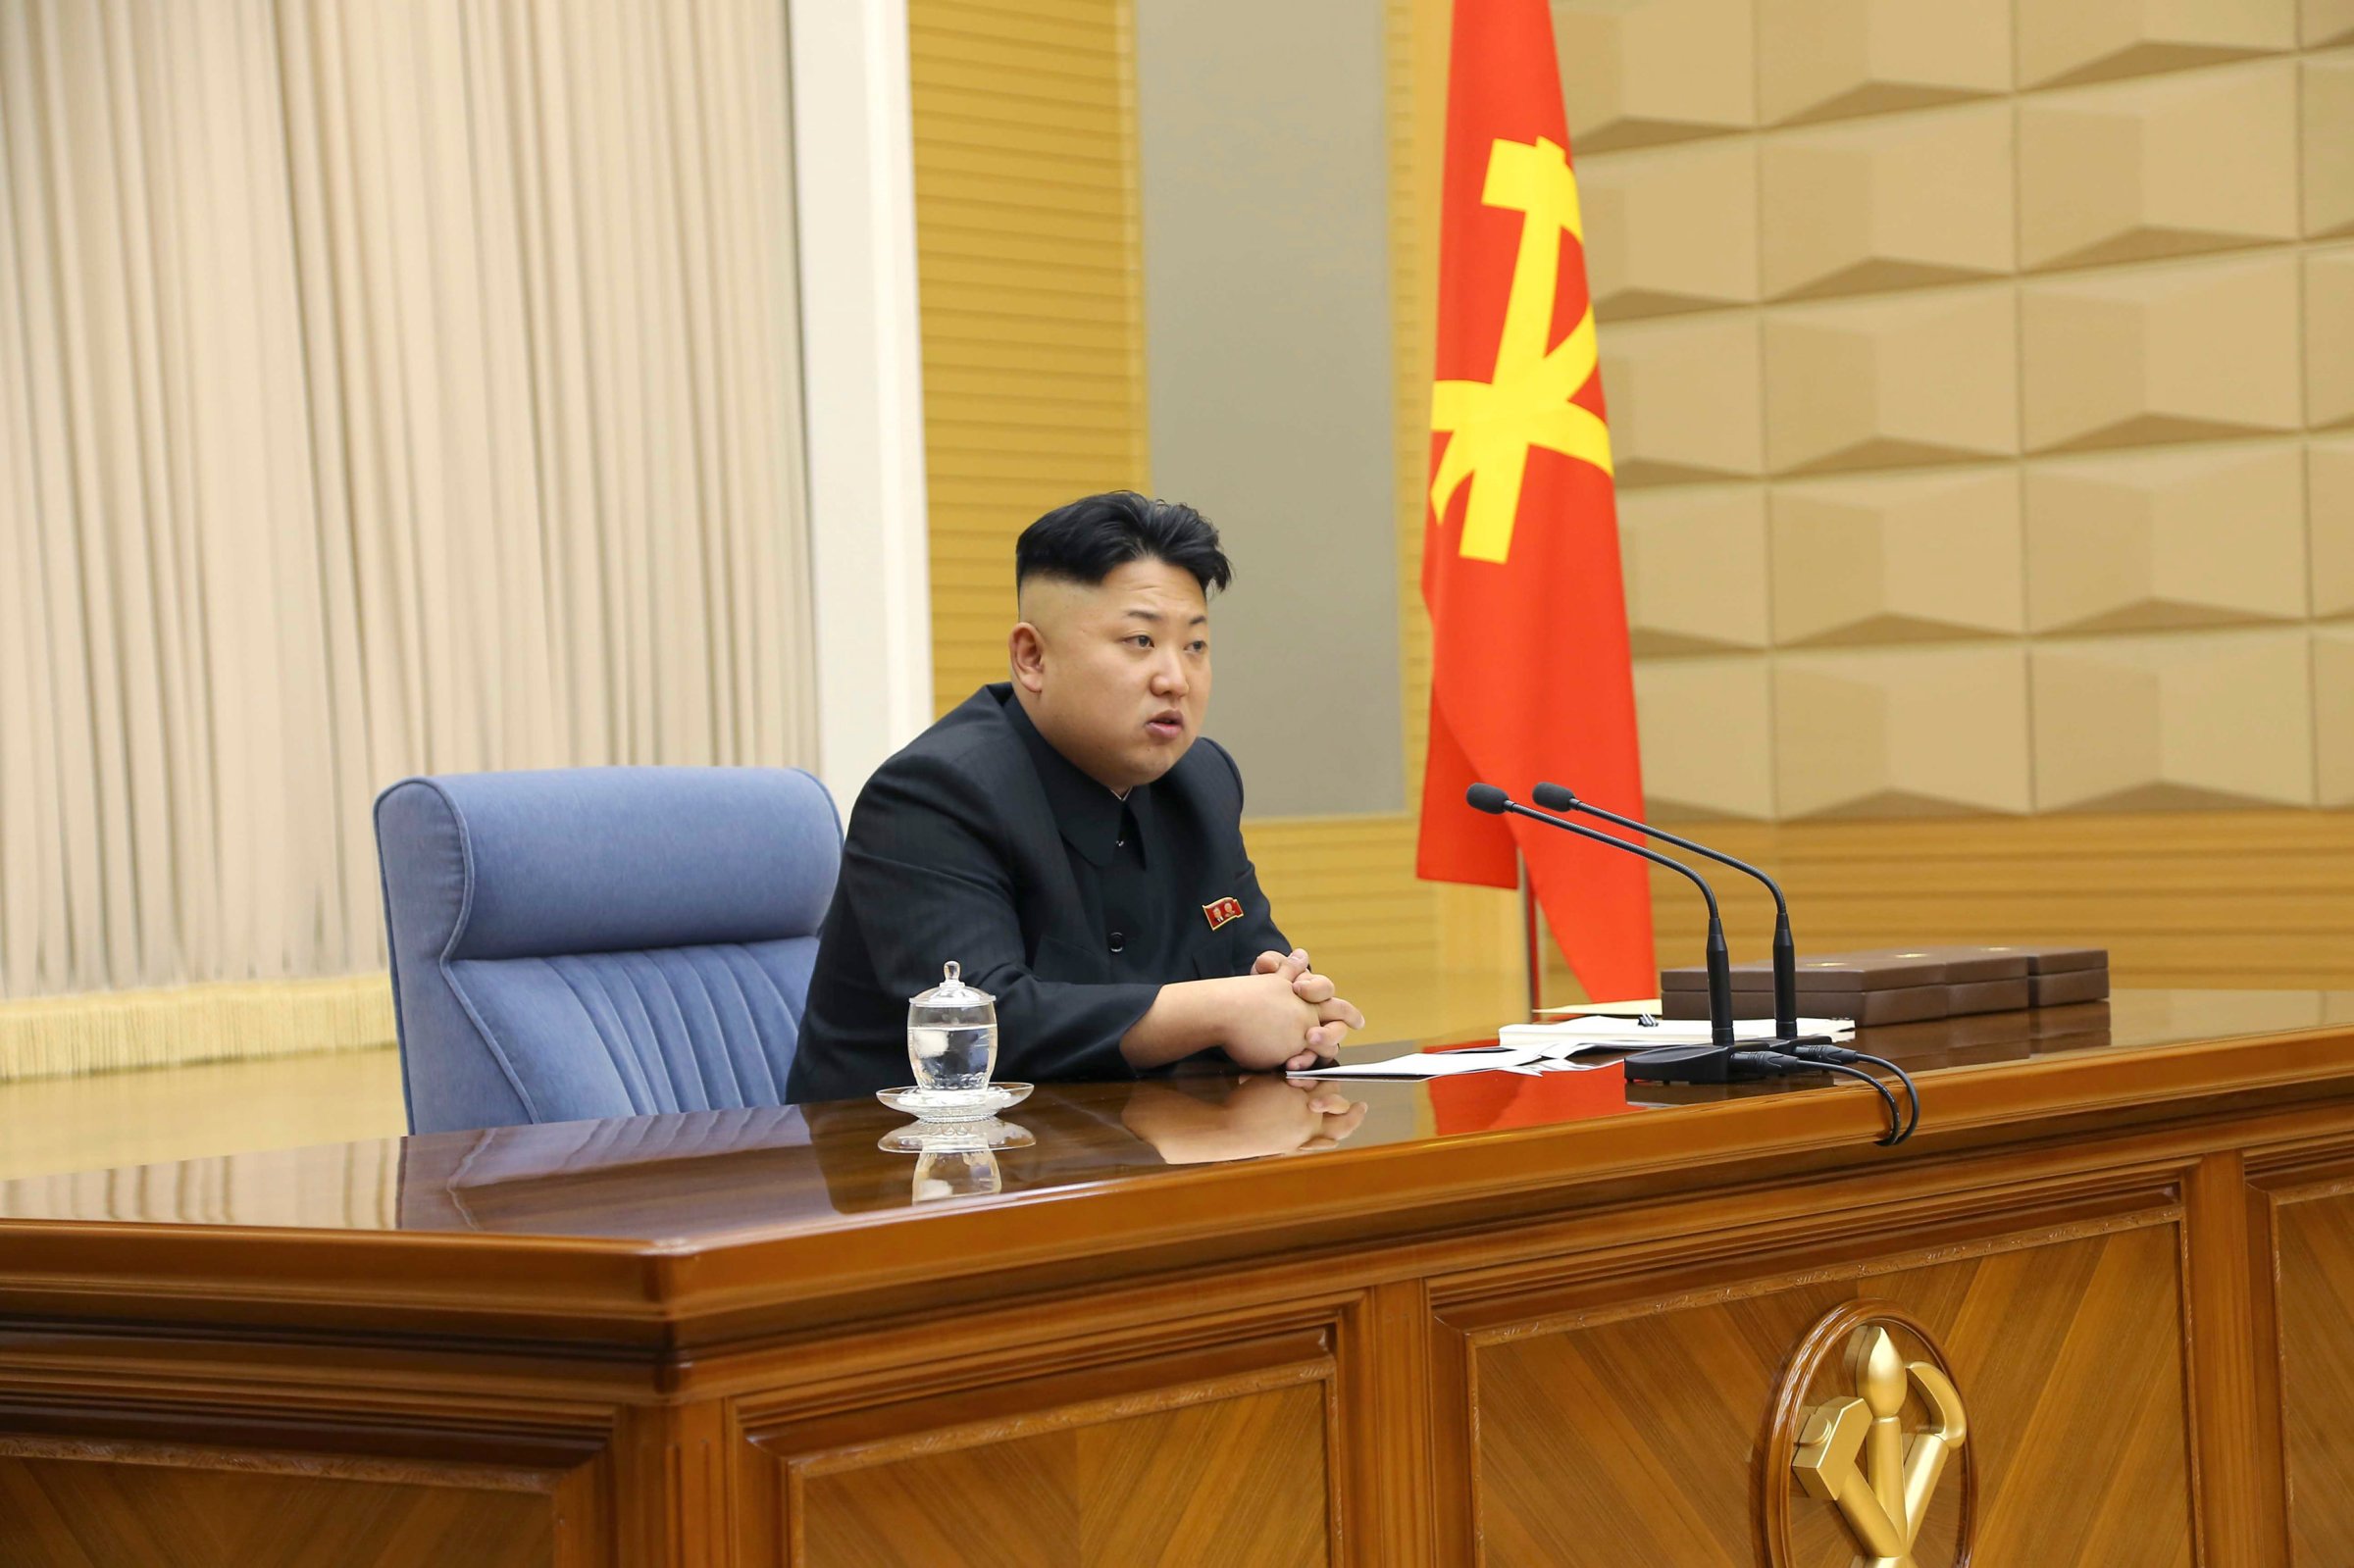 North Korea leader Kim Jong Un presides over a meeting of the Central Military Commission of the Workers' Party of Korea